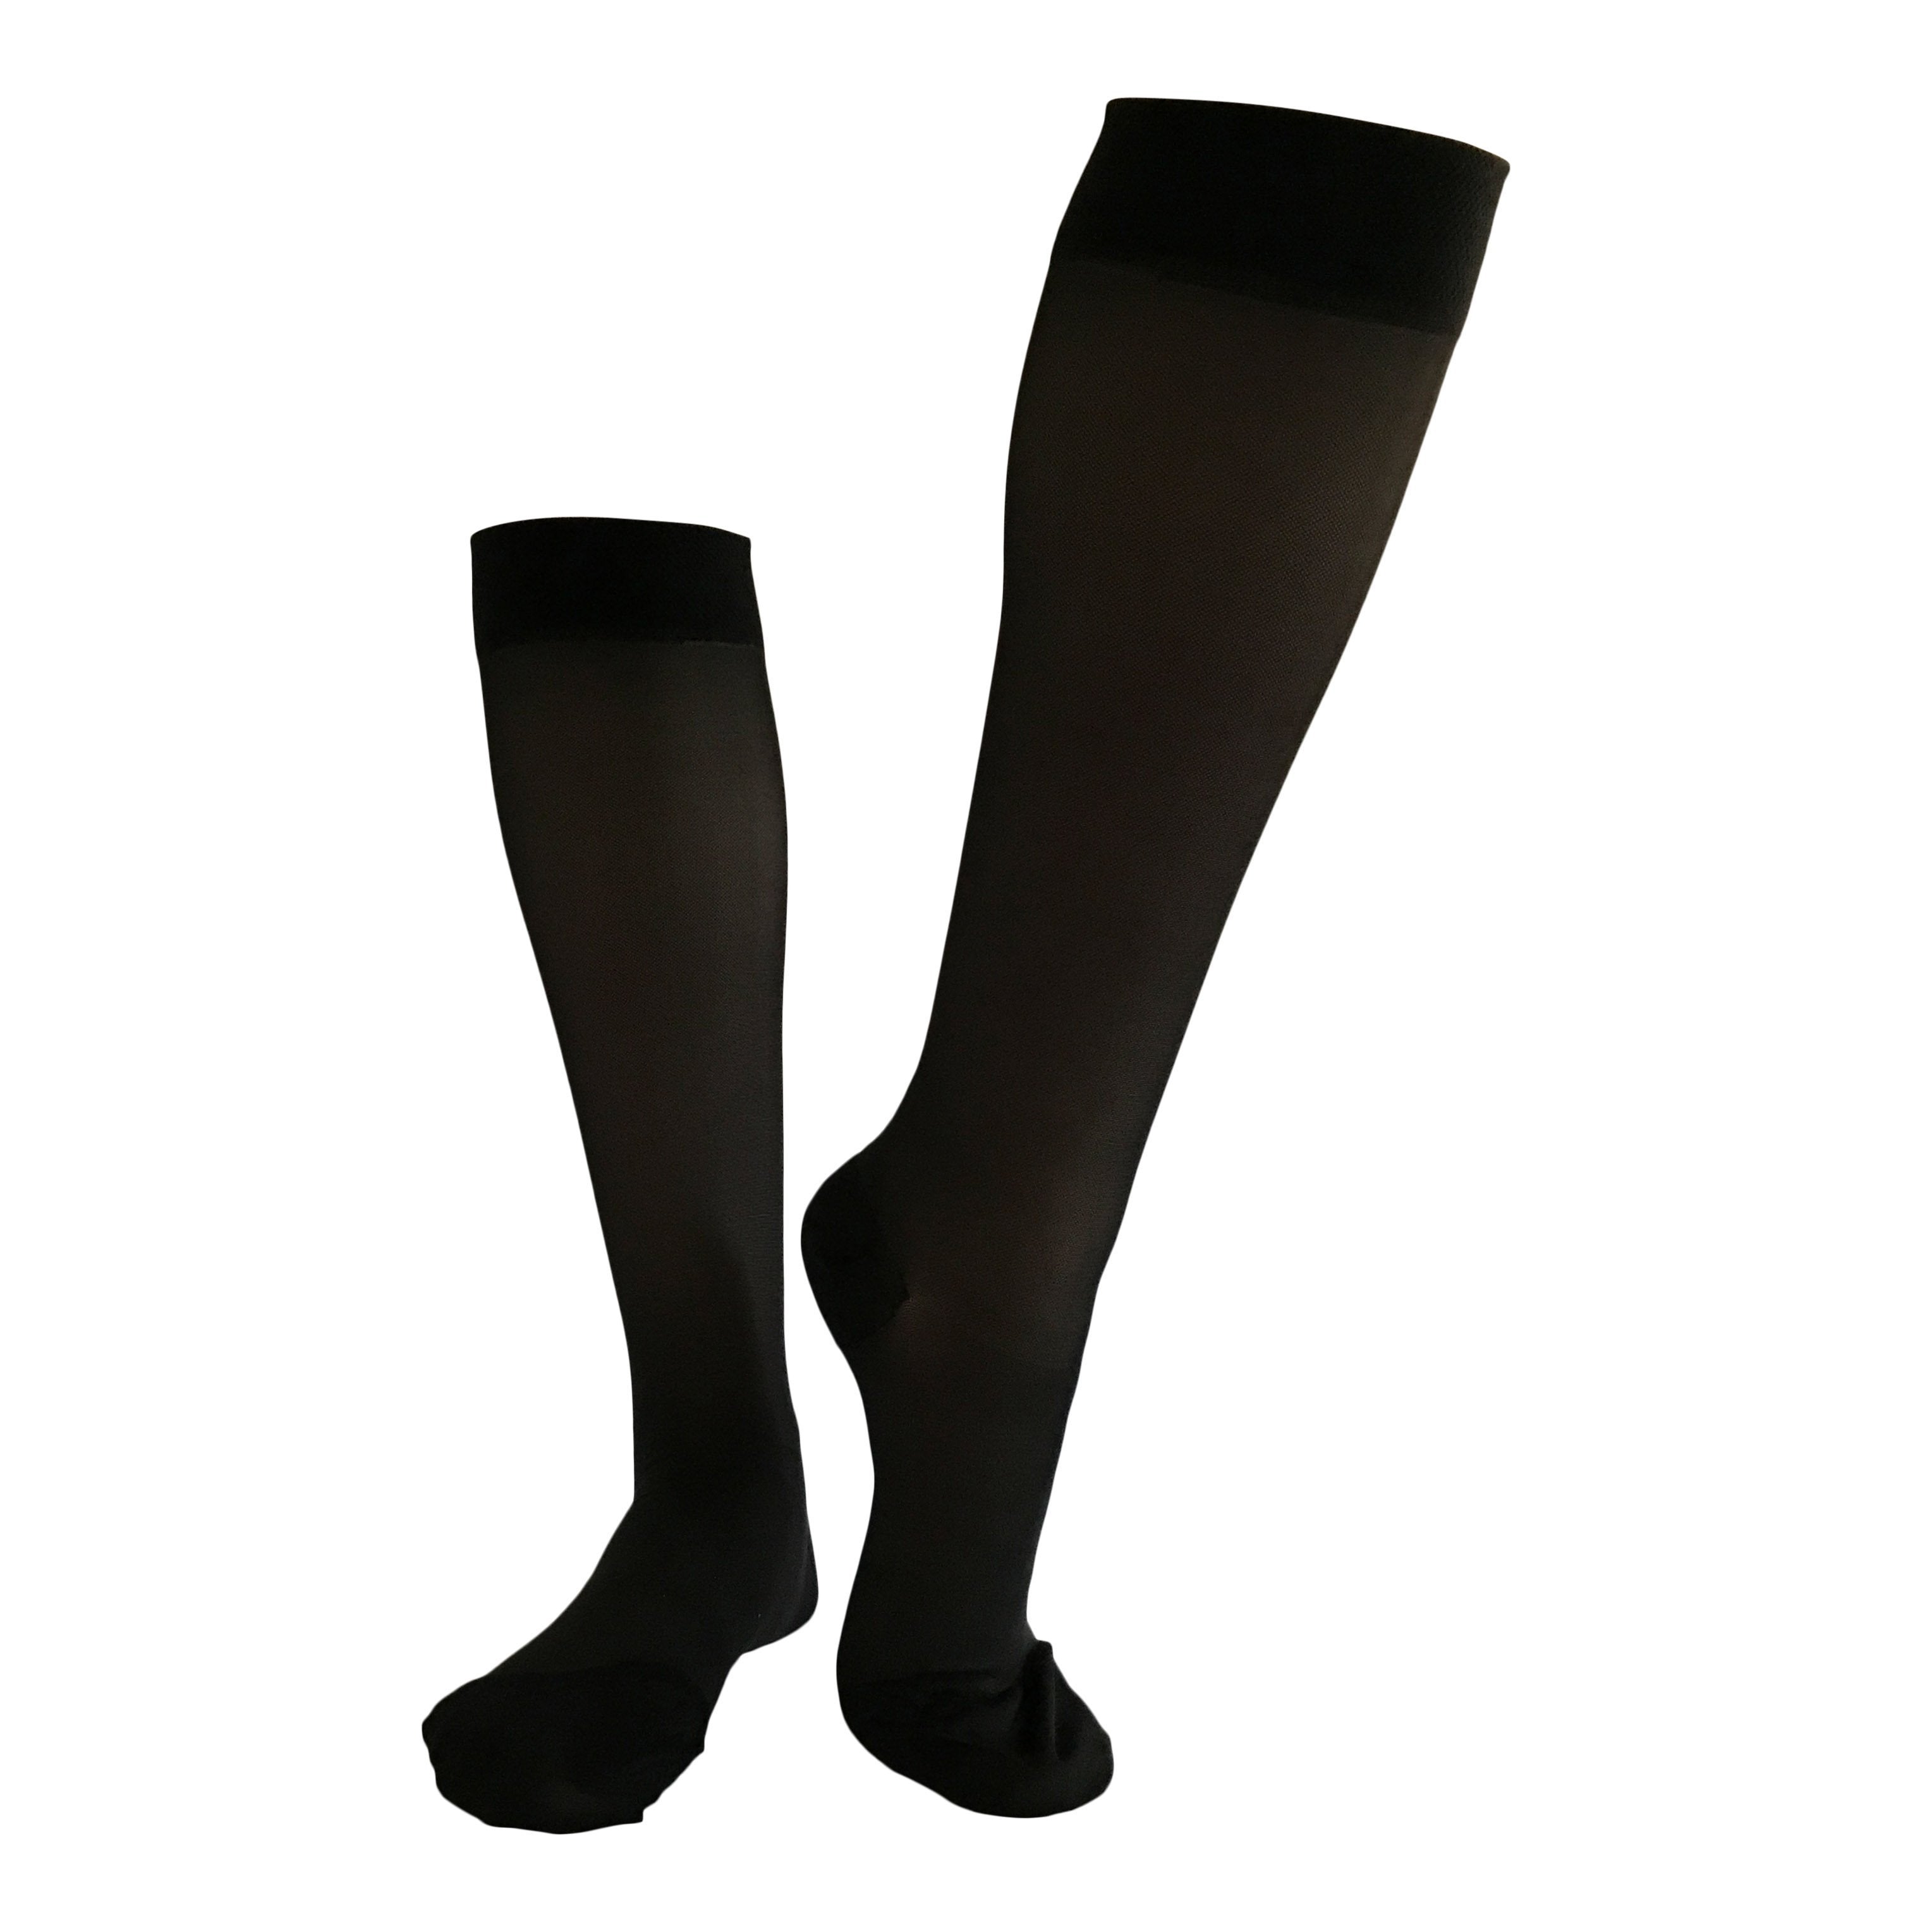 Therafirm Knee-High Compression Stockings, 20-30 mmHg – One Stop